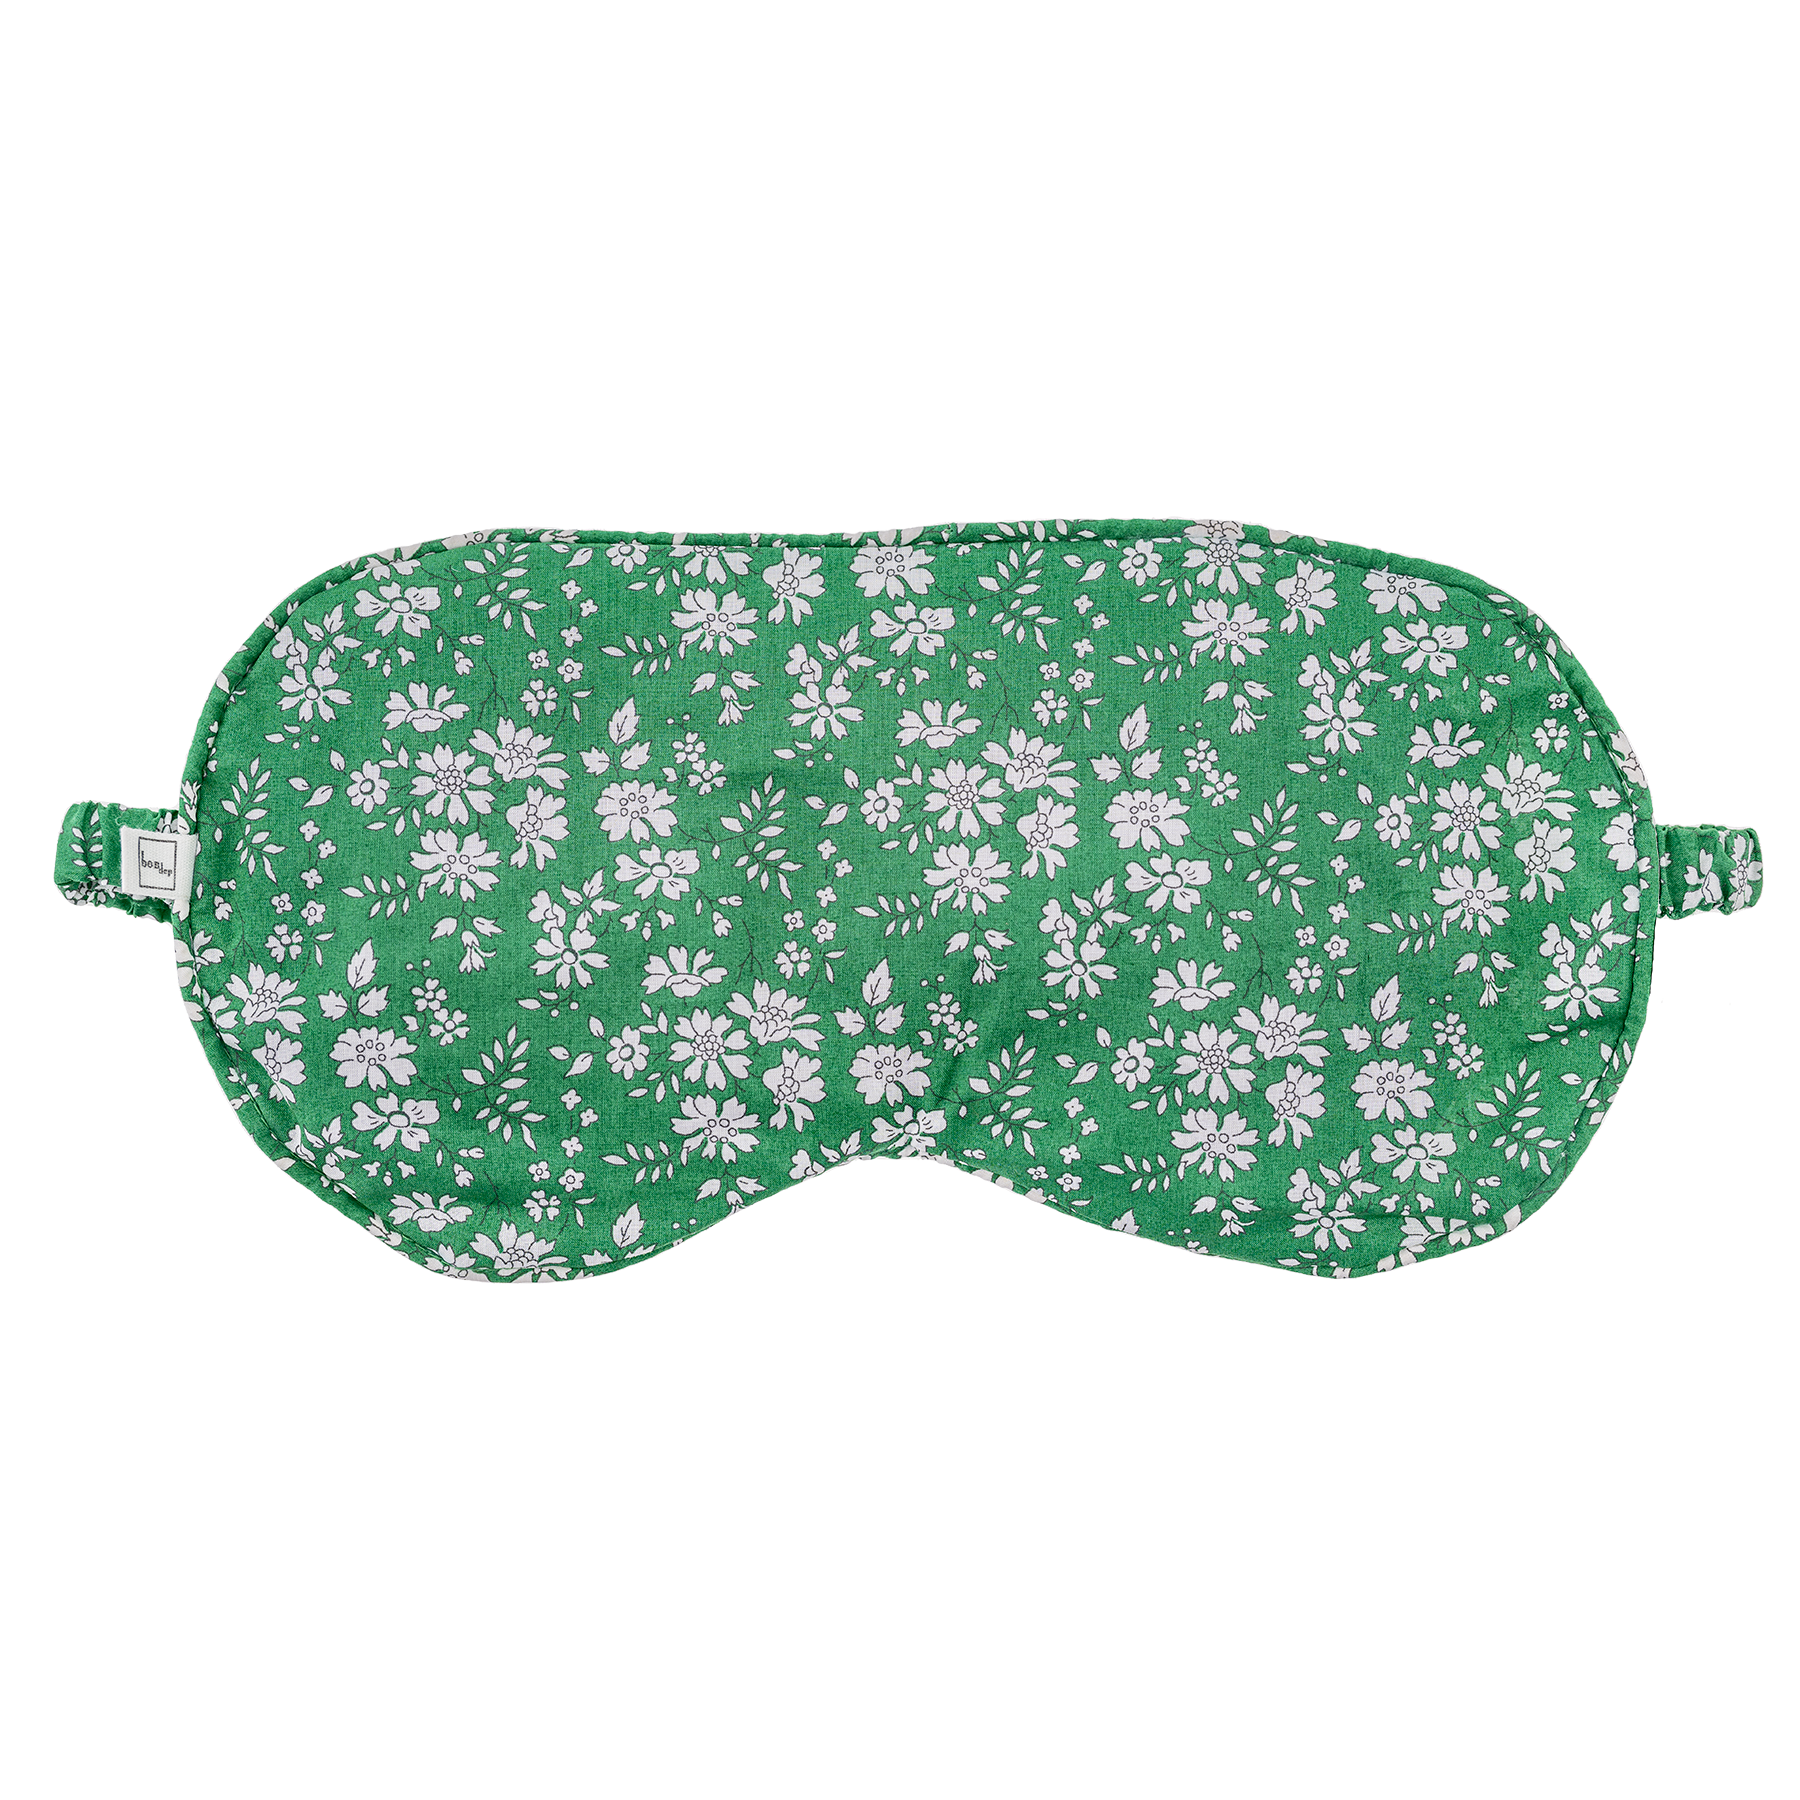 Image of Relaxing eye masks mw Liberty Capel Green from Bon Dep Essentials